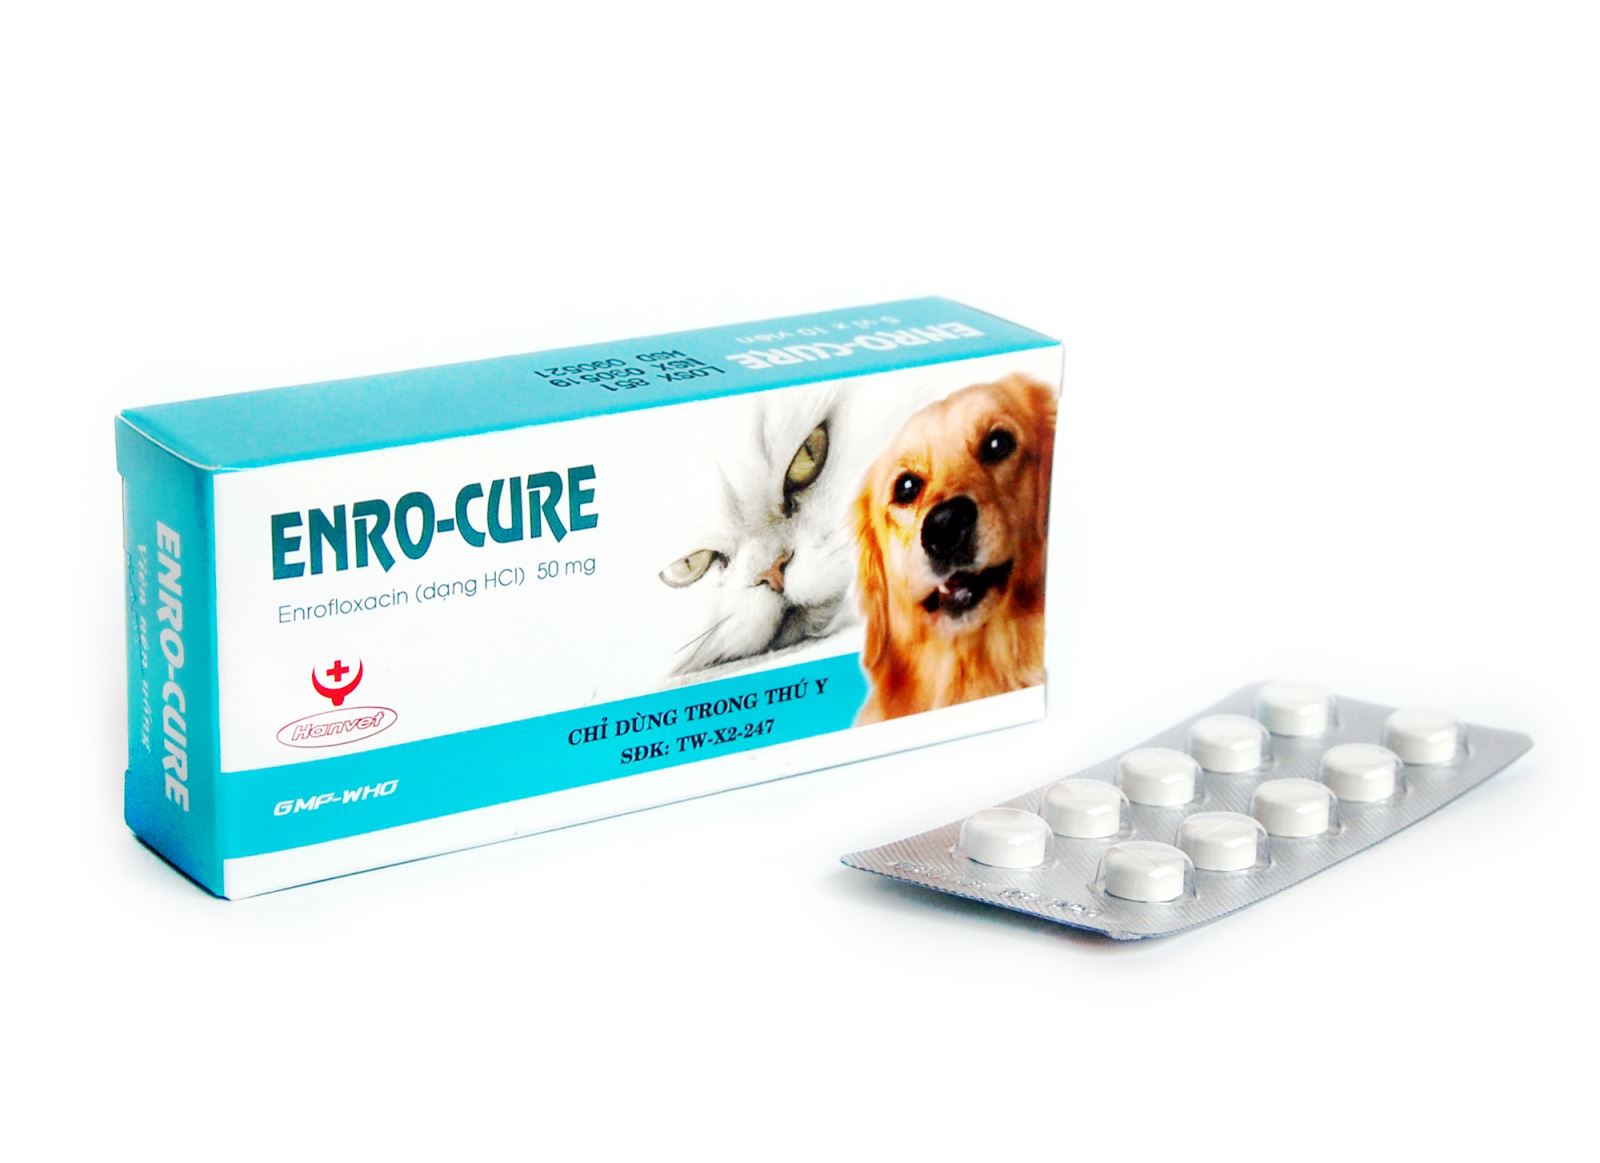 Enro-cure